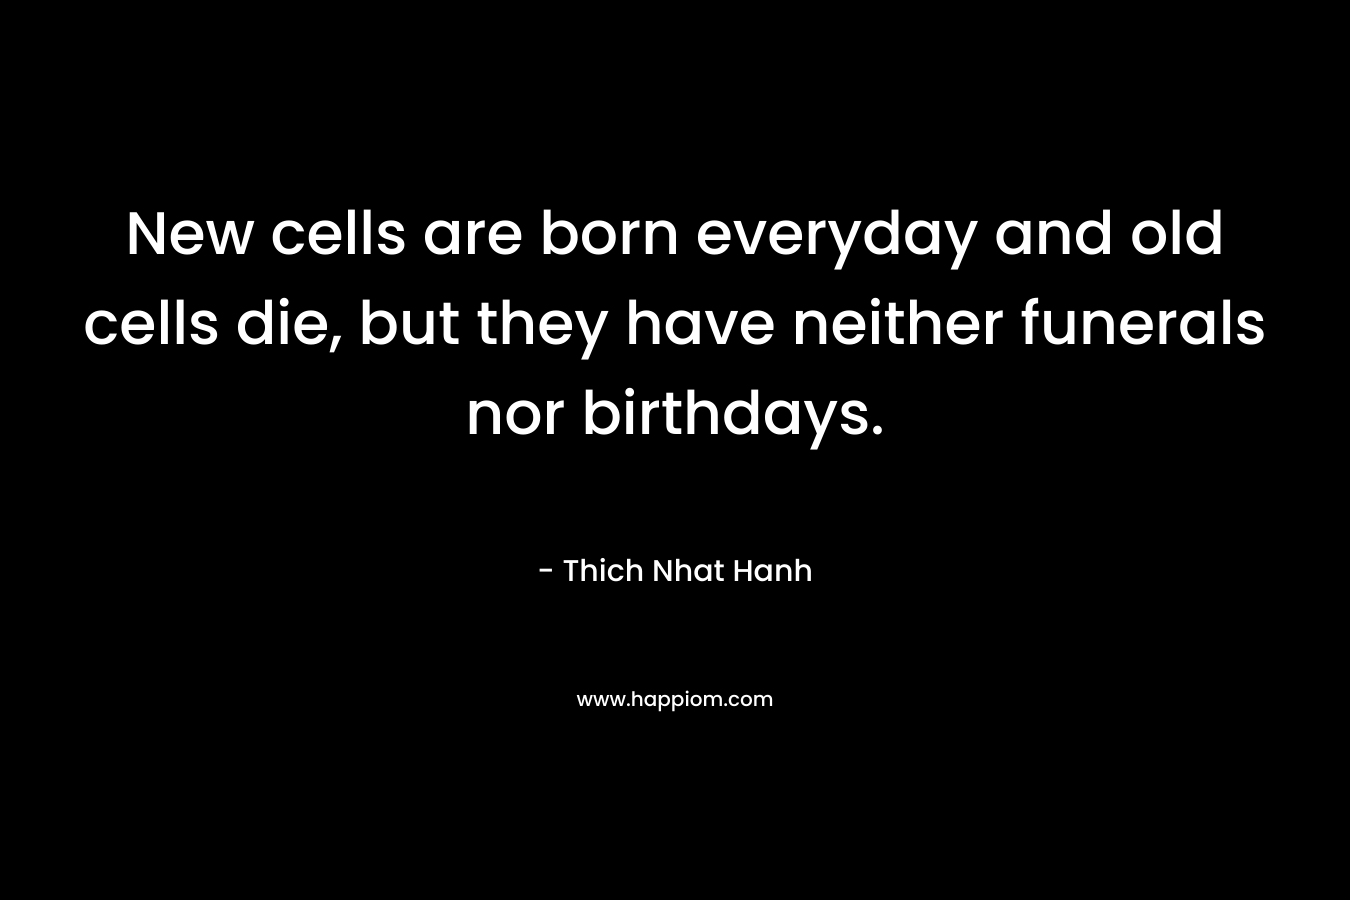 New cells are born everyday and old cells die, but they have neither funerals nor birthdays.